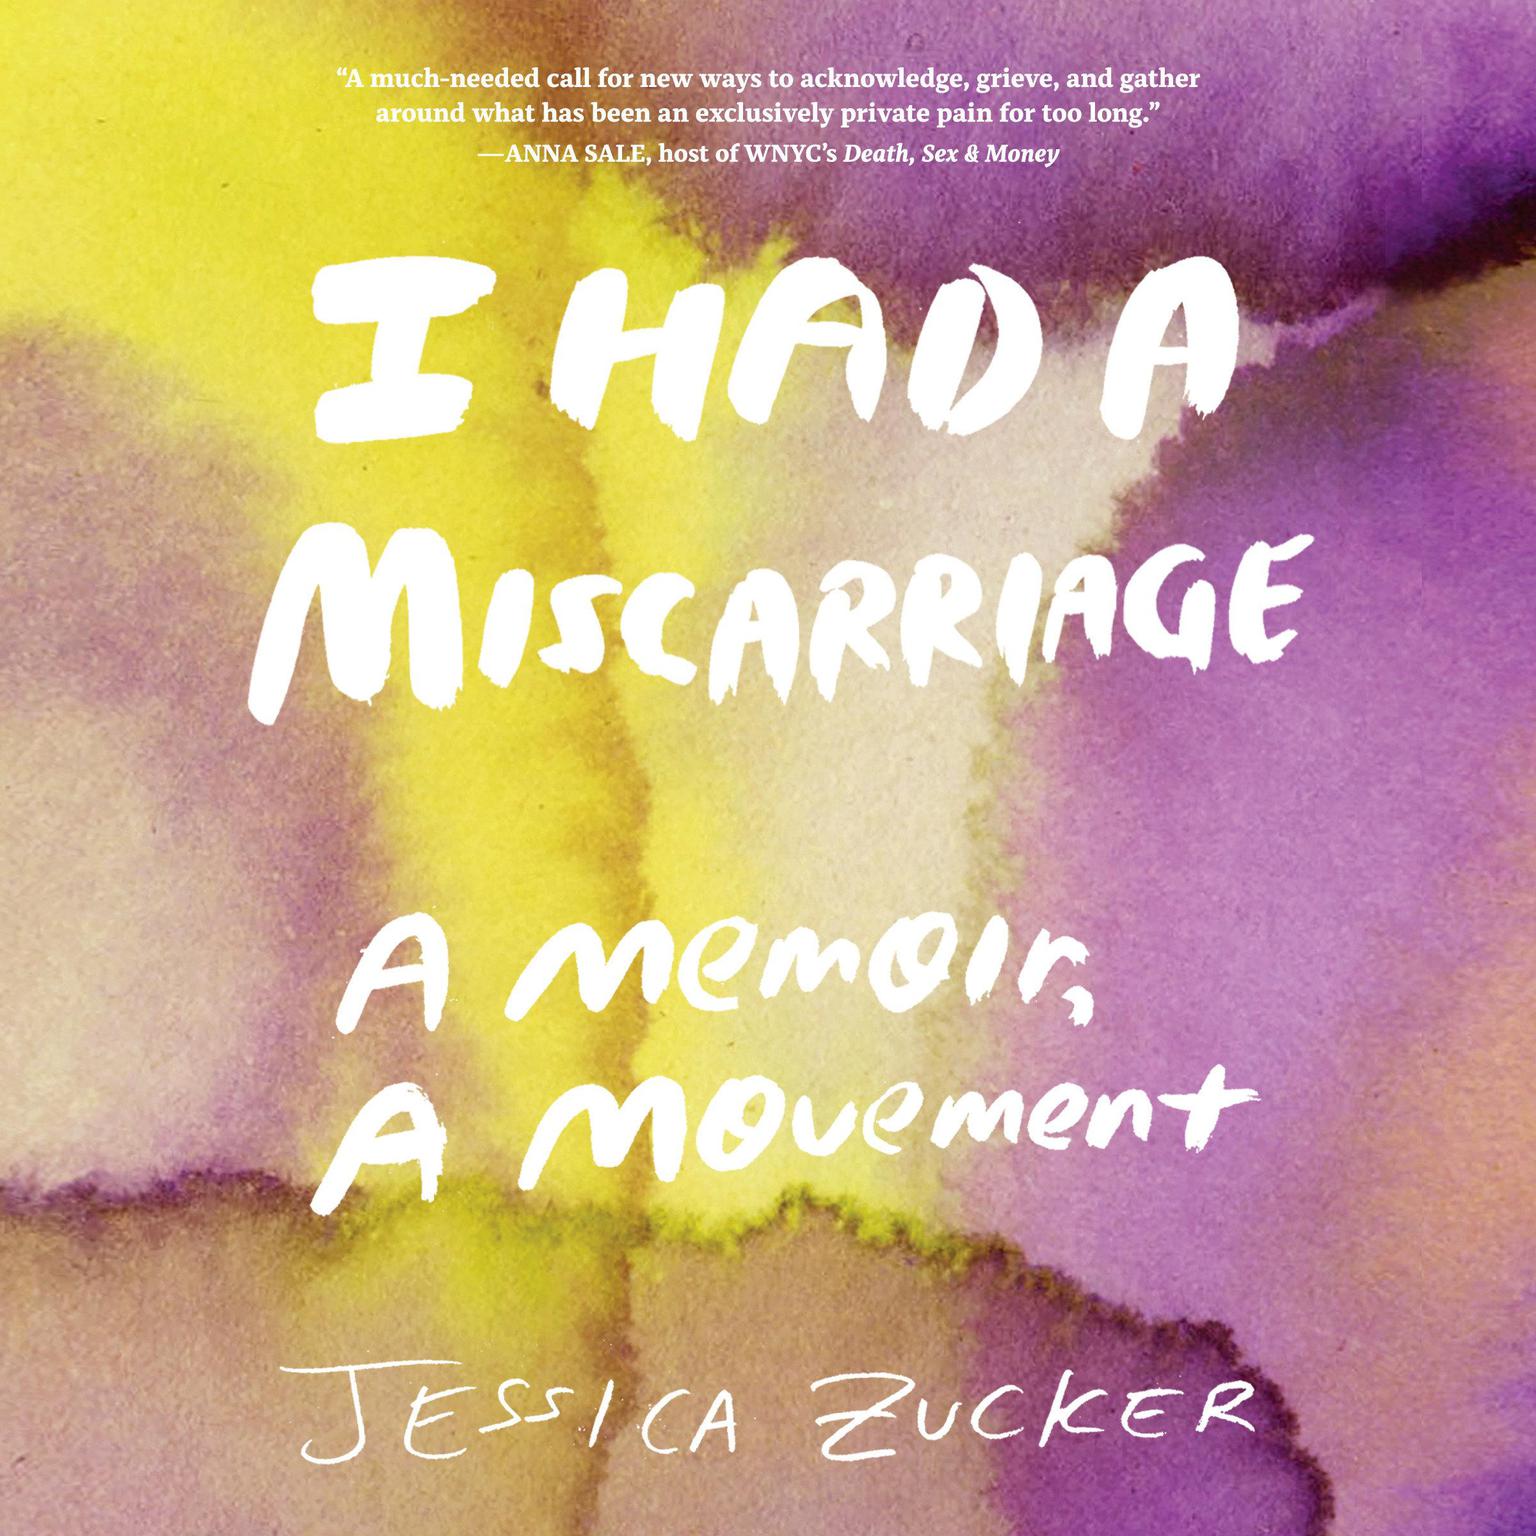 I Had a Miscarriage: A Memoir, a Movement Audiobook, by Jessica Zucker